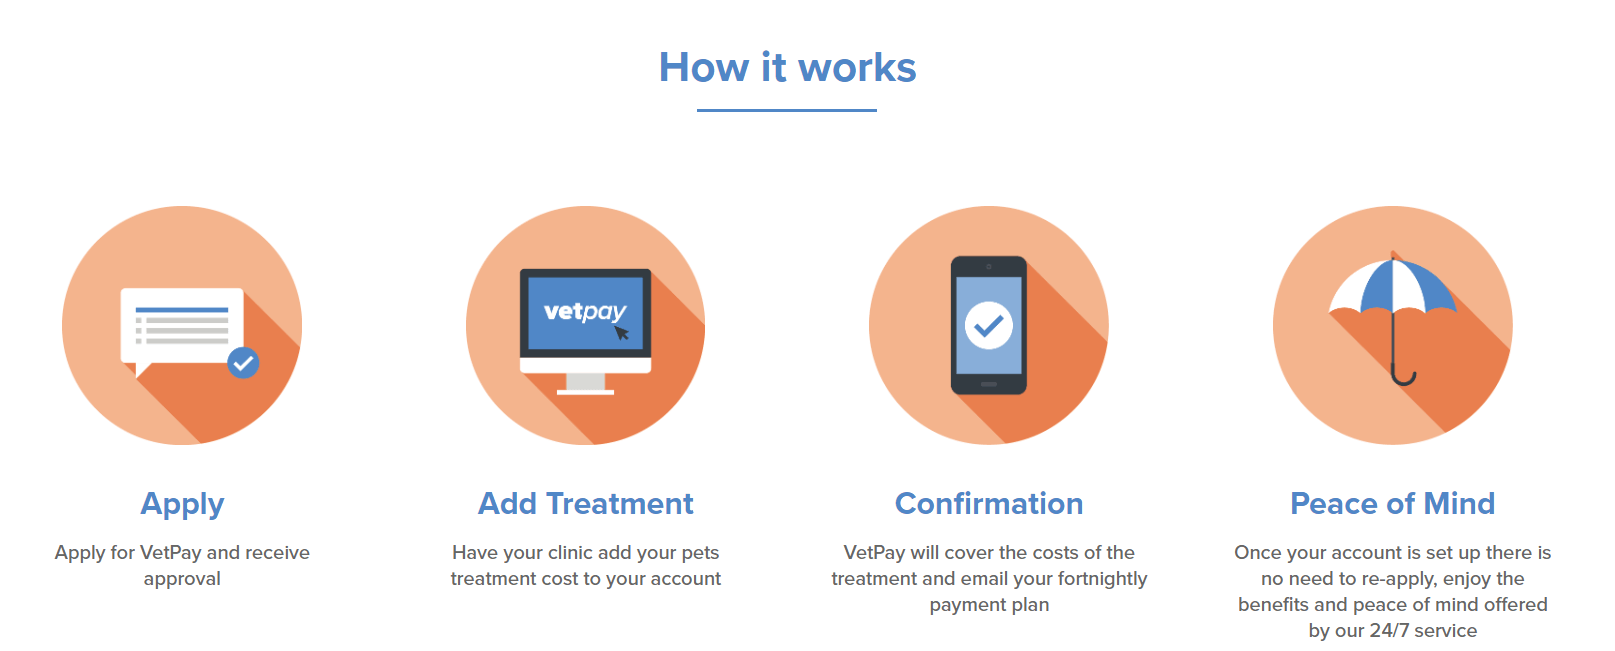 VetPay veterinary treatment payment plan explained